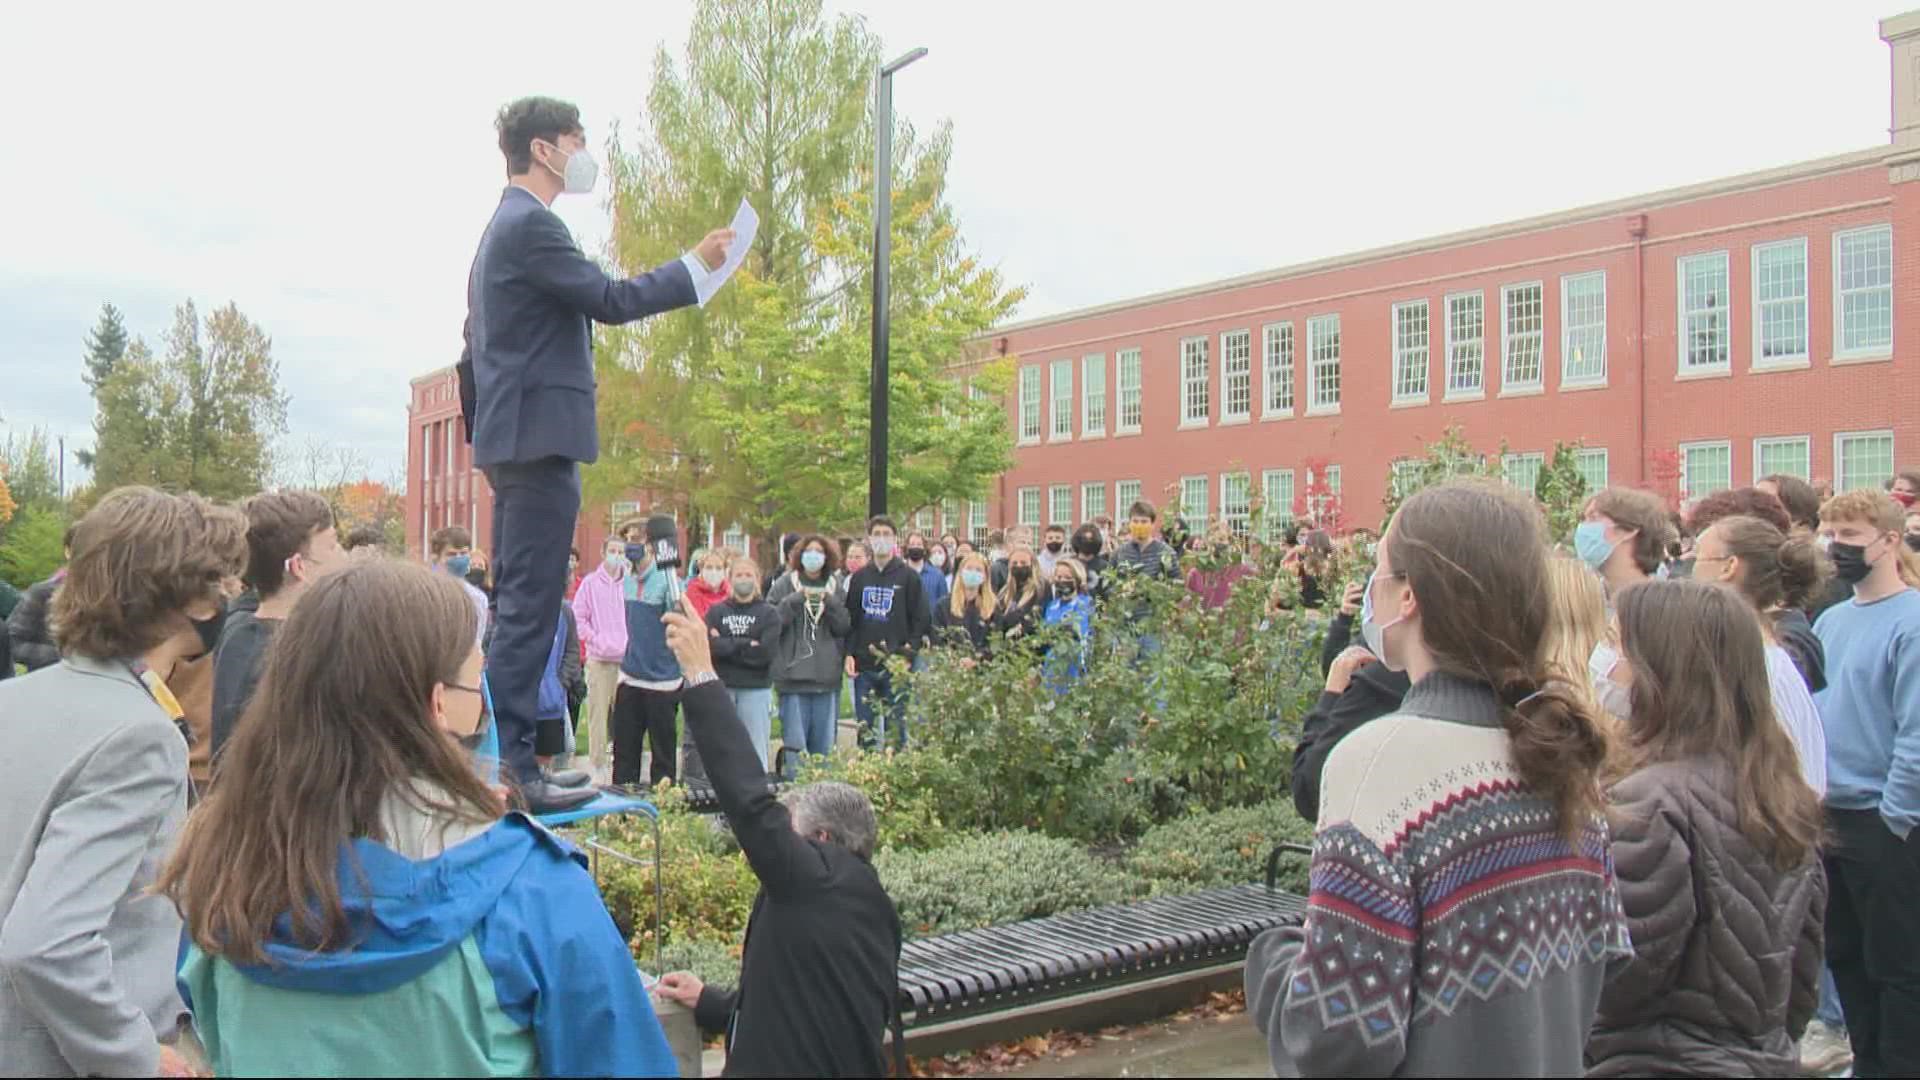 At least 200 students walked out of class on Oct. 26 to voice their support for a proposed vaccine mandate for Portland Public Schools.